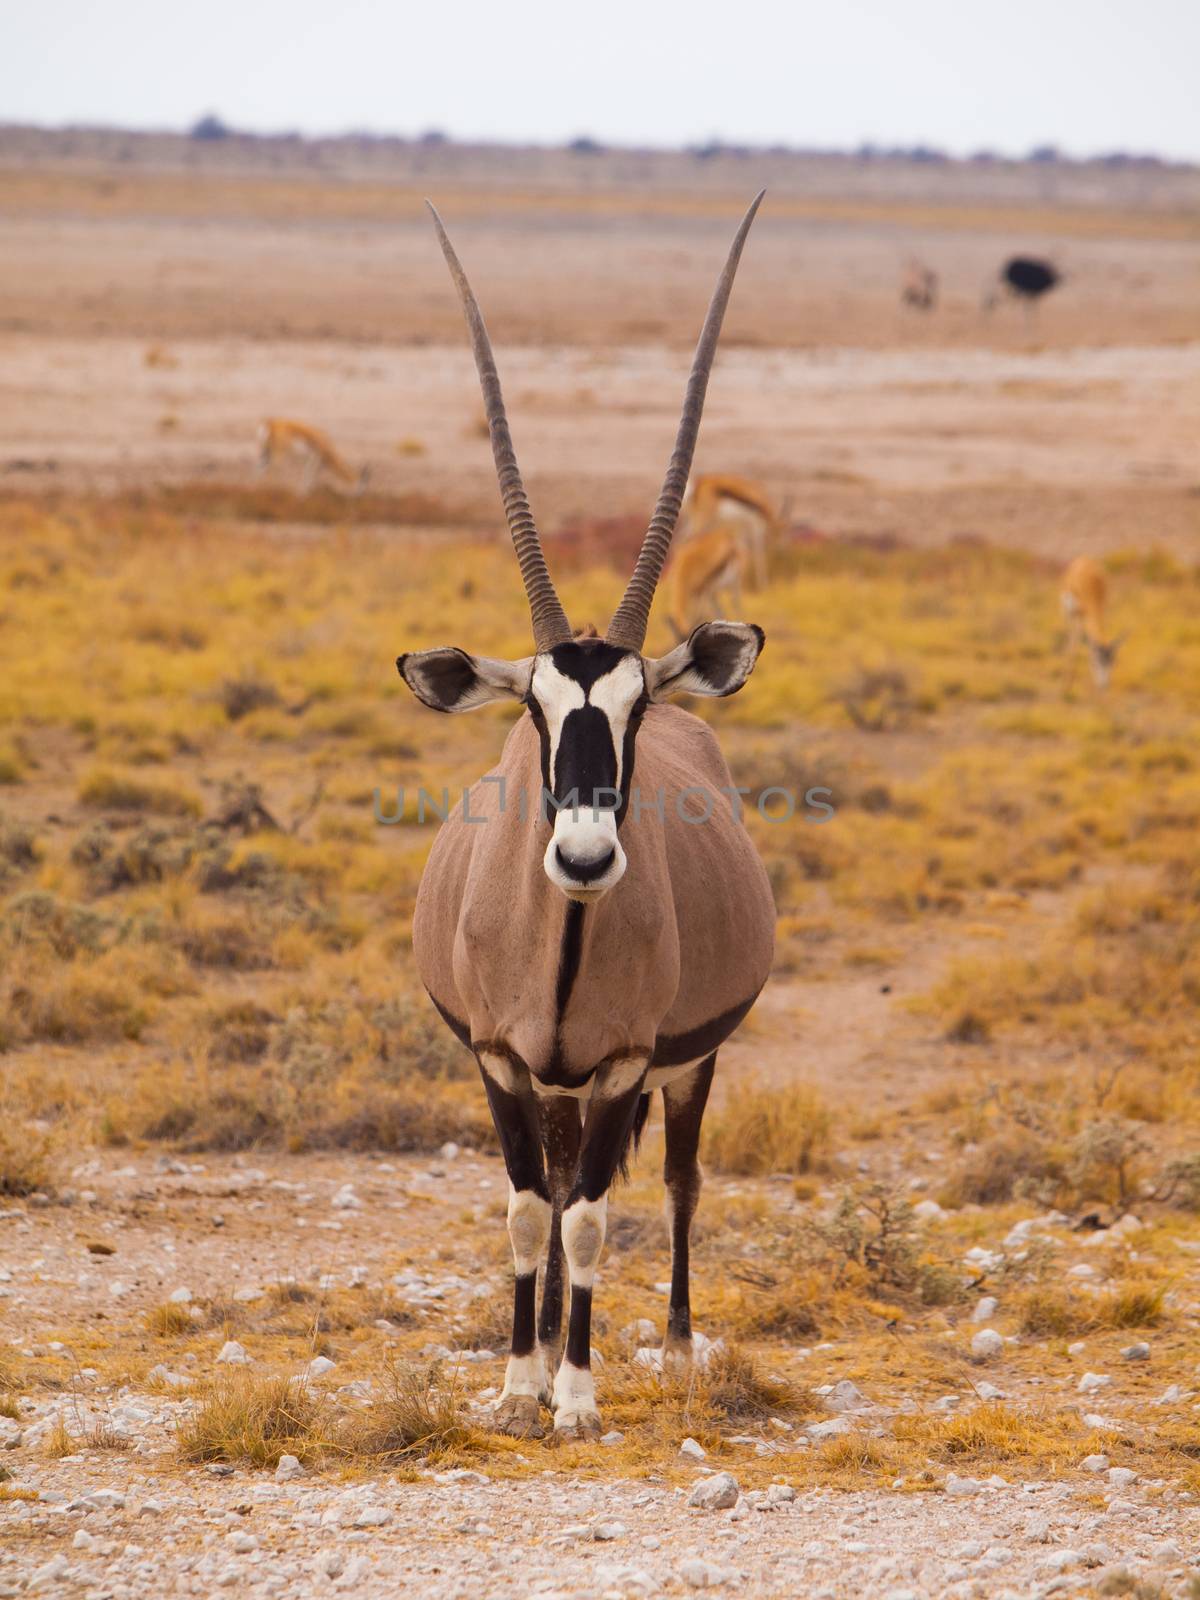 Oryx antelope by pyty